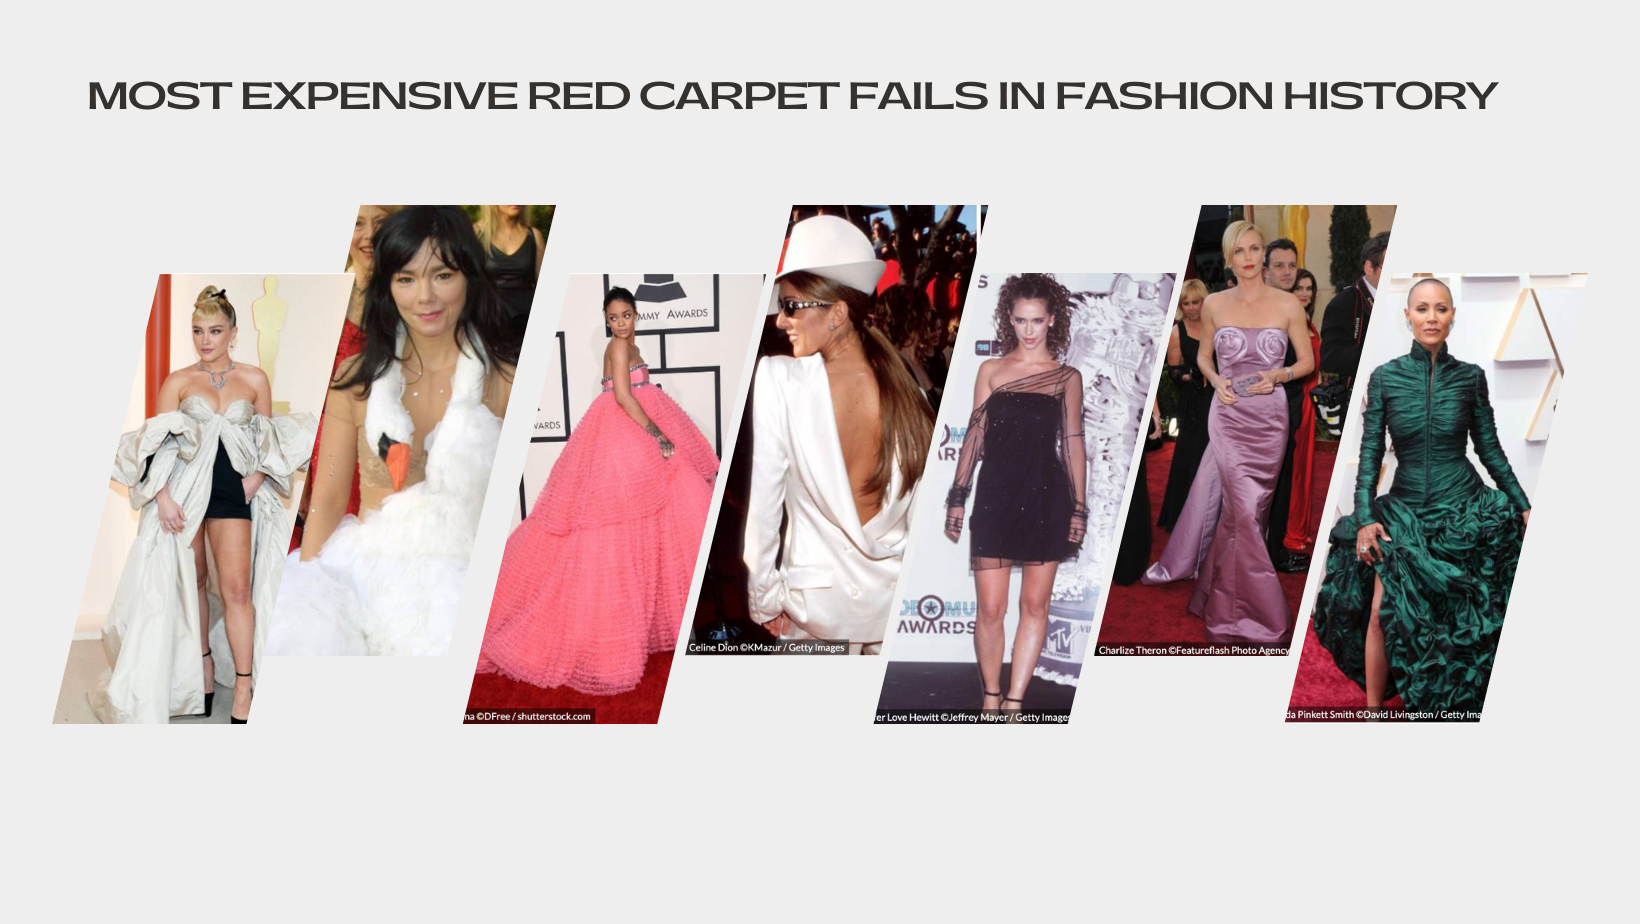 Most Expensive Red Carpet Fails in Fashion History